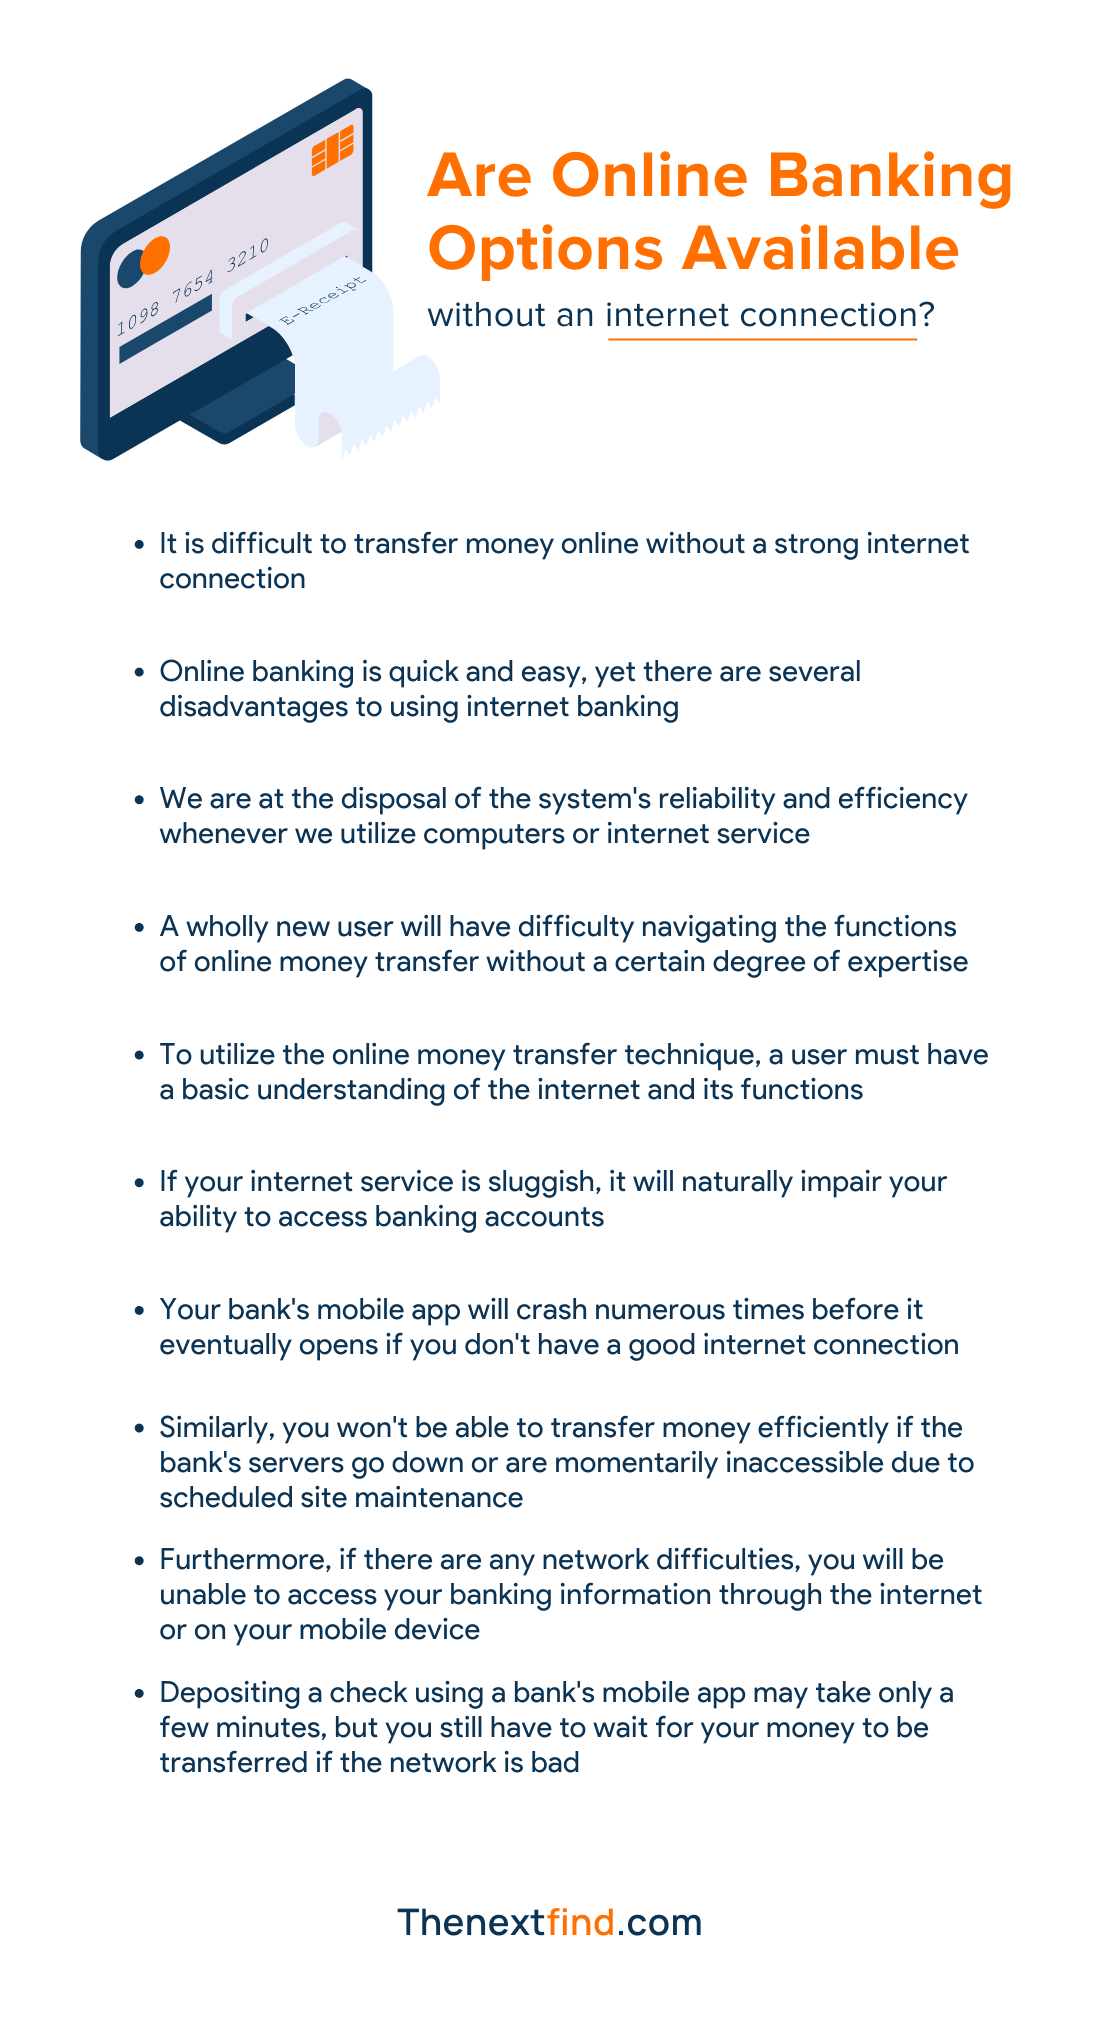 Are online banking options available without an internet connection